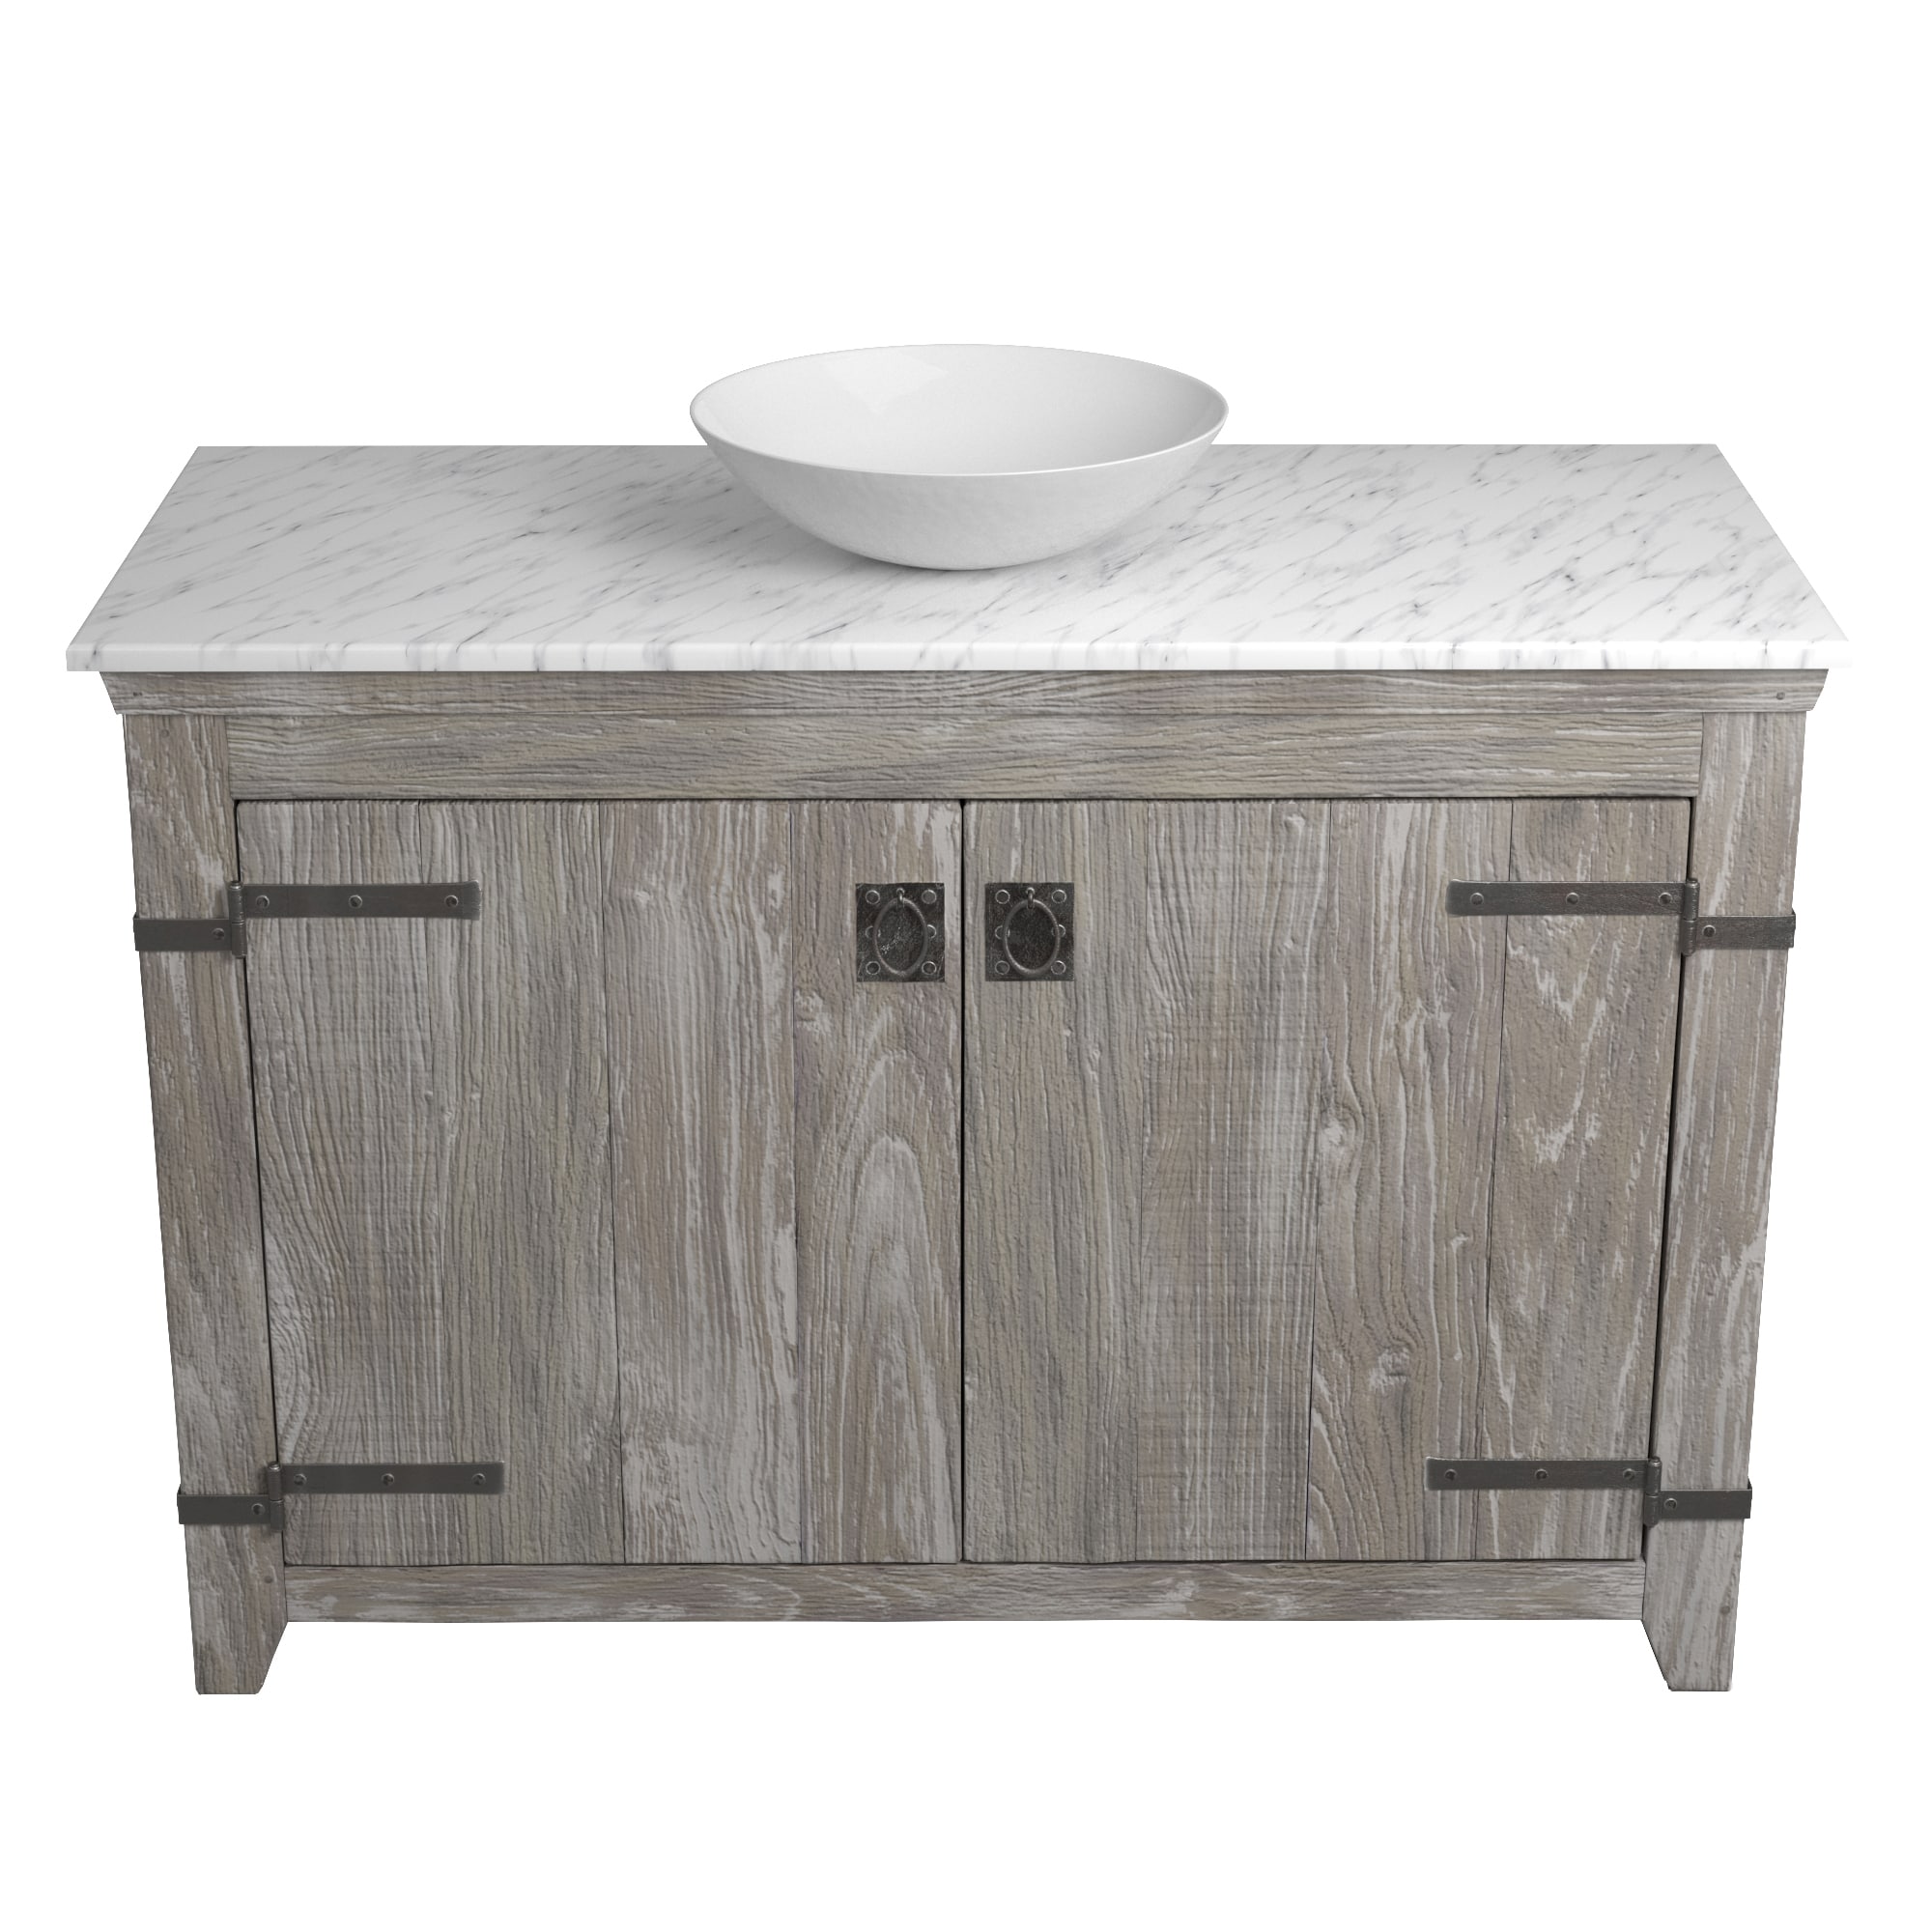 Native Trails 48" Americana Vanity in Driftwood with Carrara Marble Top and Verona in Bianco, Single Faucet Hole, BND48-VB-CT-MG-079